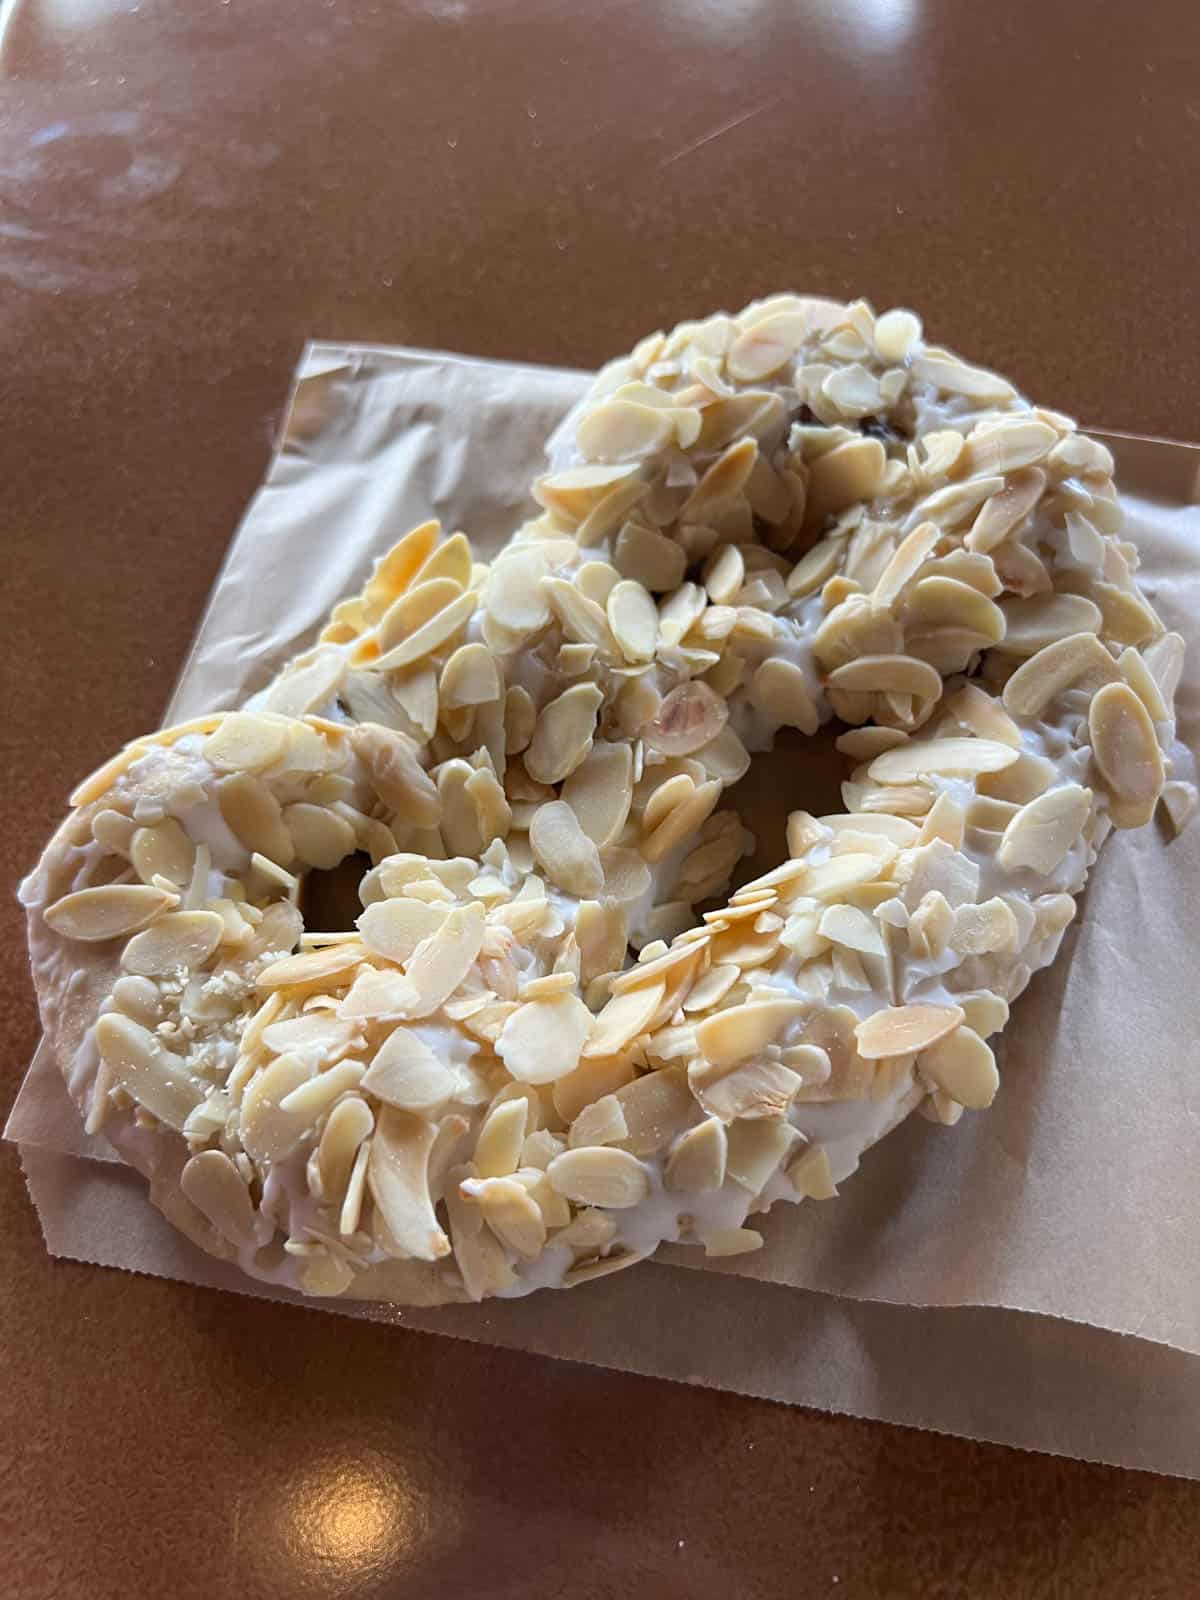 The almond pretzel at the Norwegian bakery at Epcot.